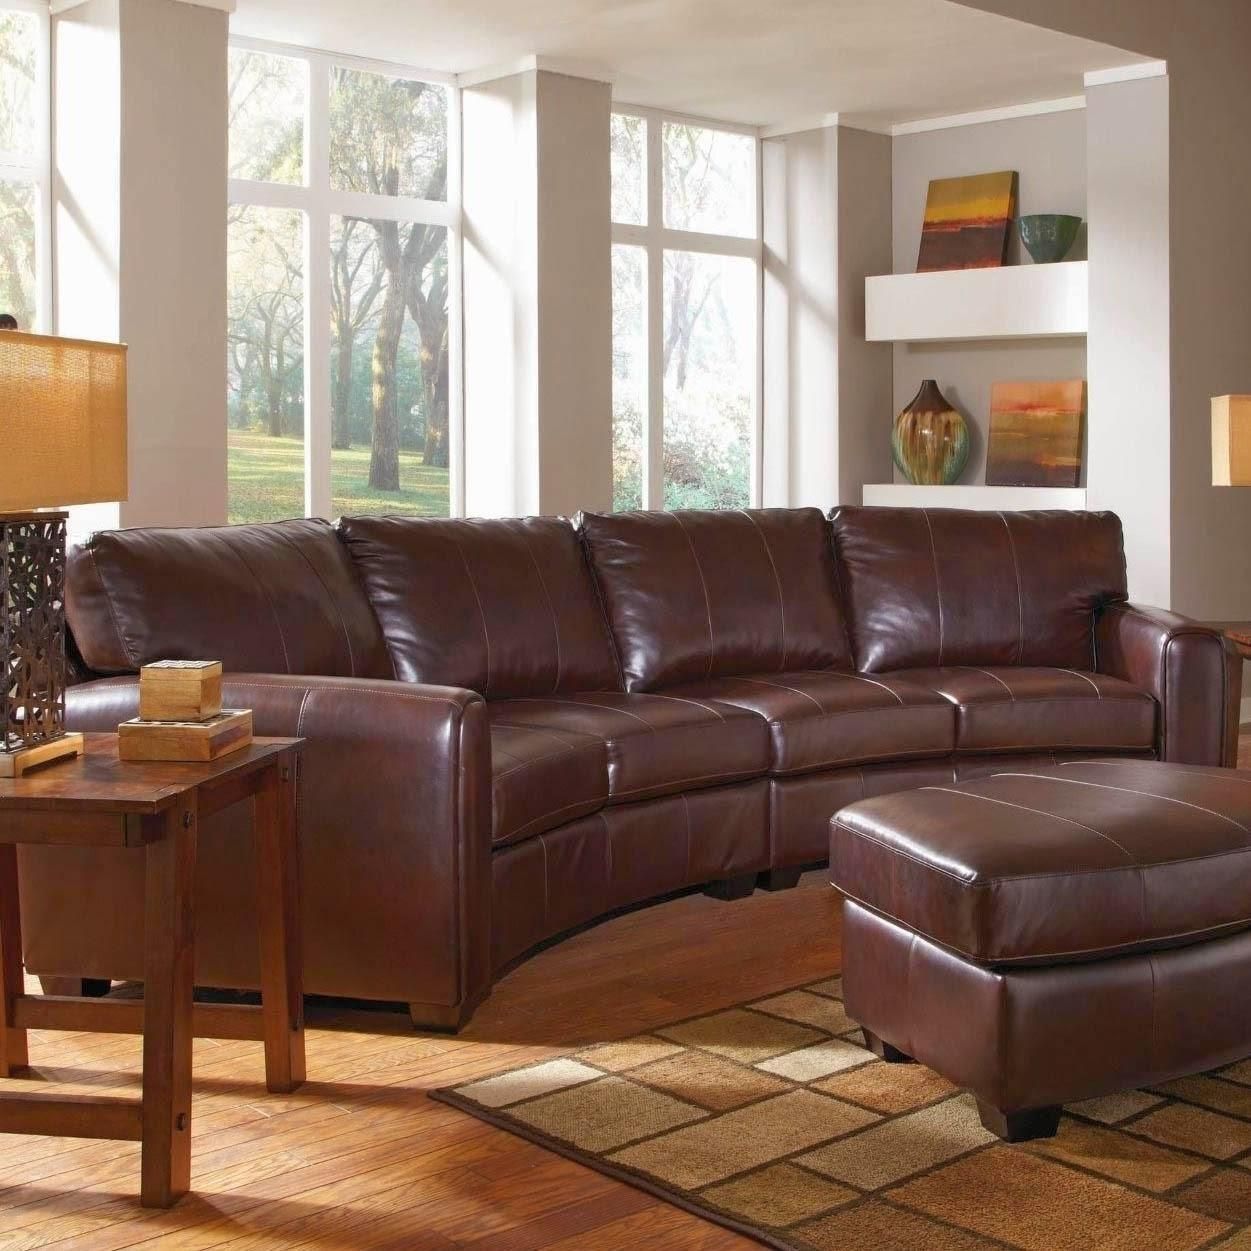 Sofas Center : Curved Reclining Sofa Vera Leathersouthern Intended For Curved Recliner Sofa (Photo 19 of 20)